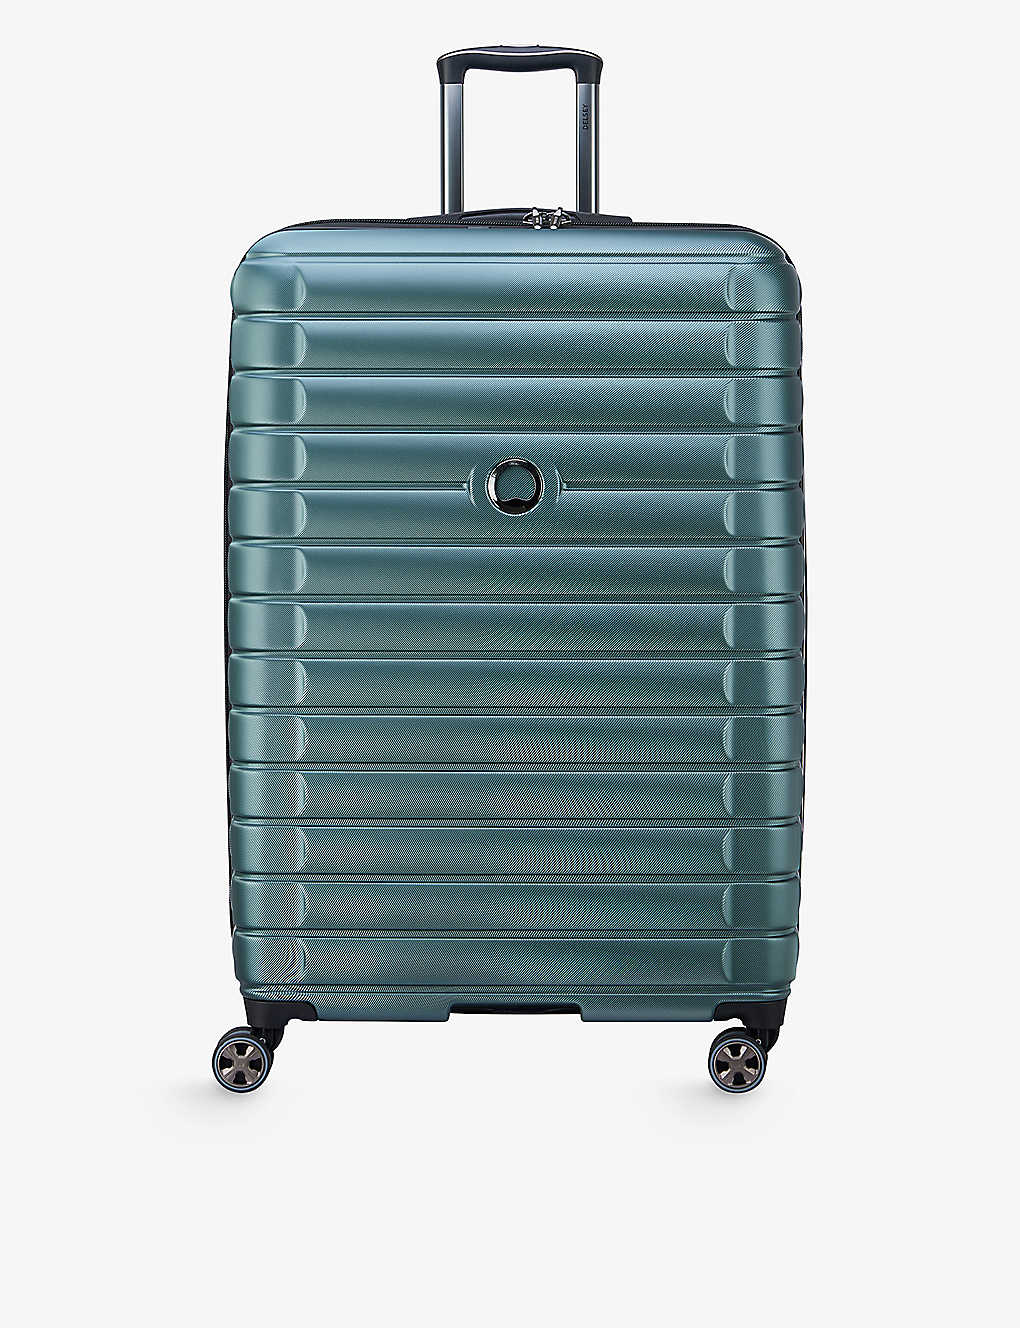 DELSEY DELSEY GREEN SHADOW 5.0 4-WHEEL XL EXPANDABLE POLYPROPYLENE HARD CHECK-IN SUITCASE